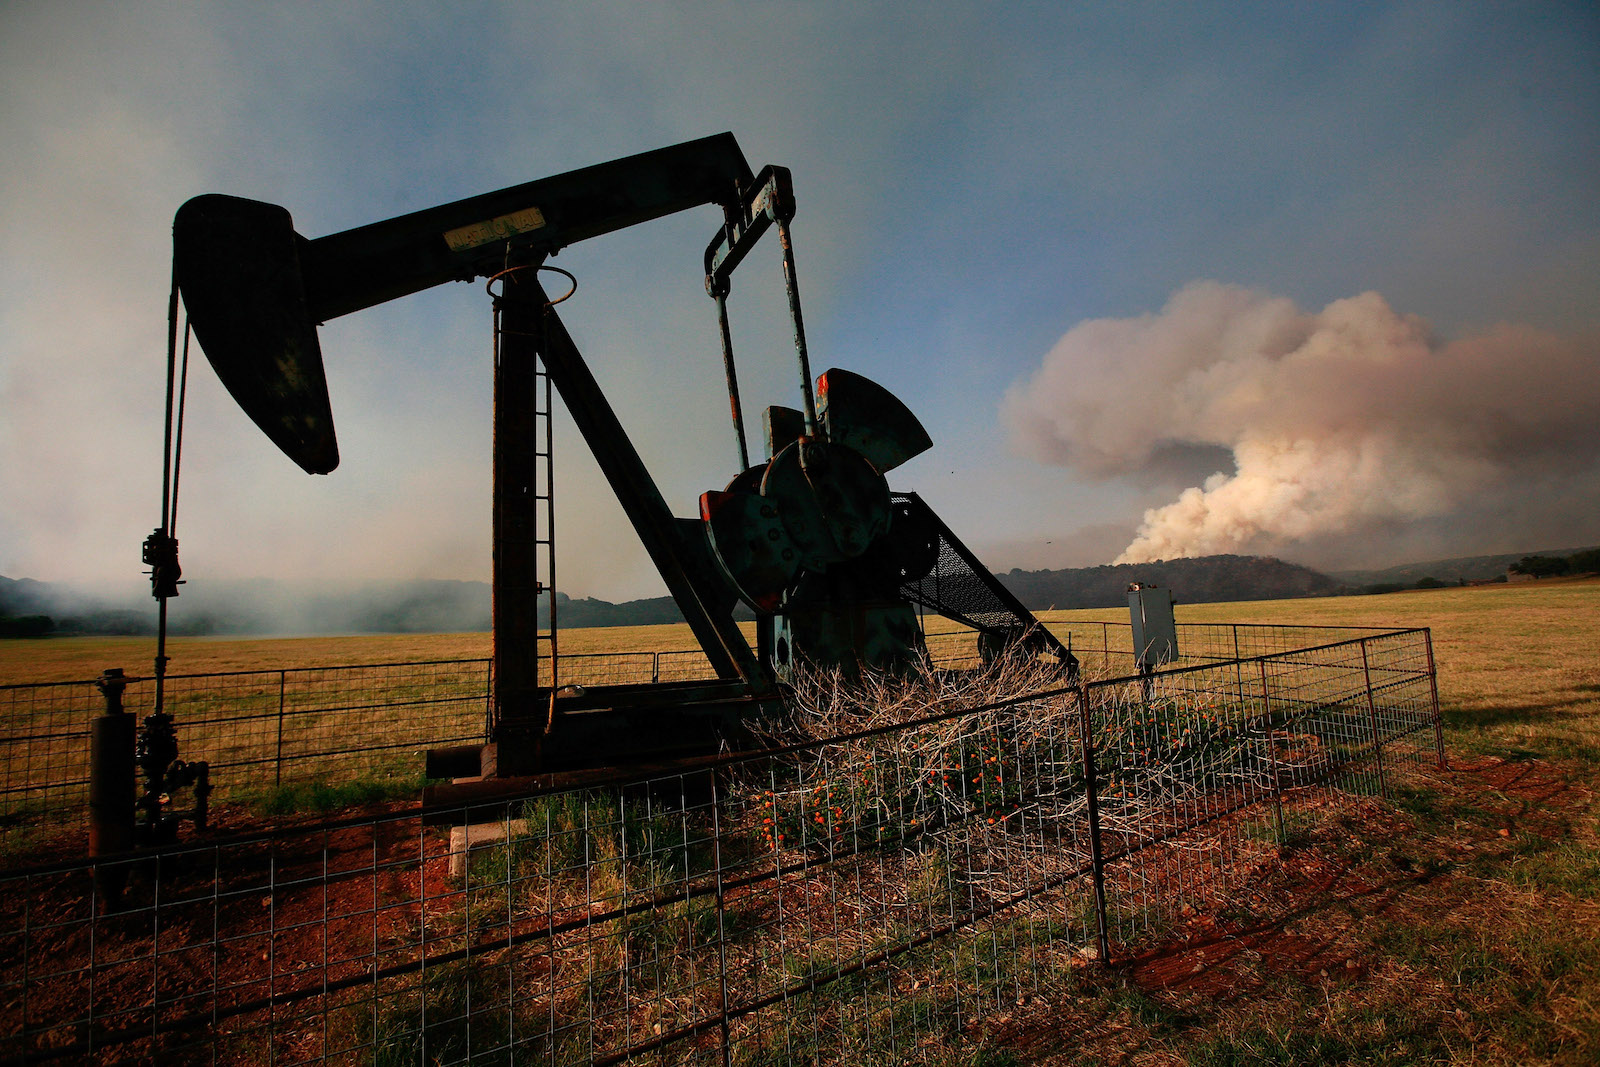 an oilfield pumpjack is silhouetted against a dry landscape. In the distance, a large white plume of smoke billows into a blue sky